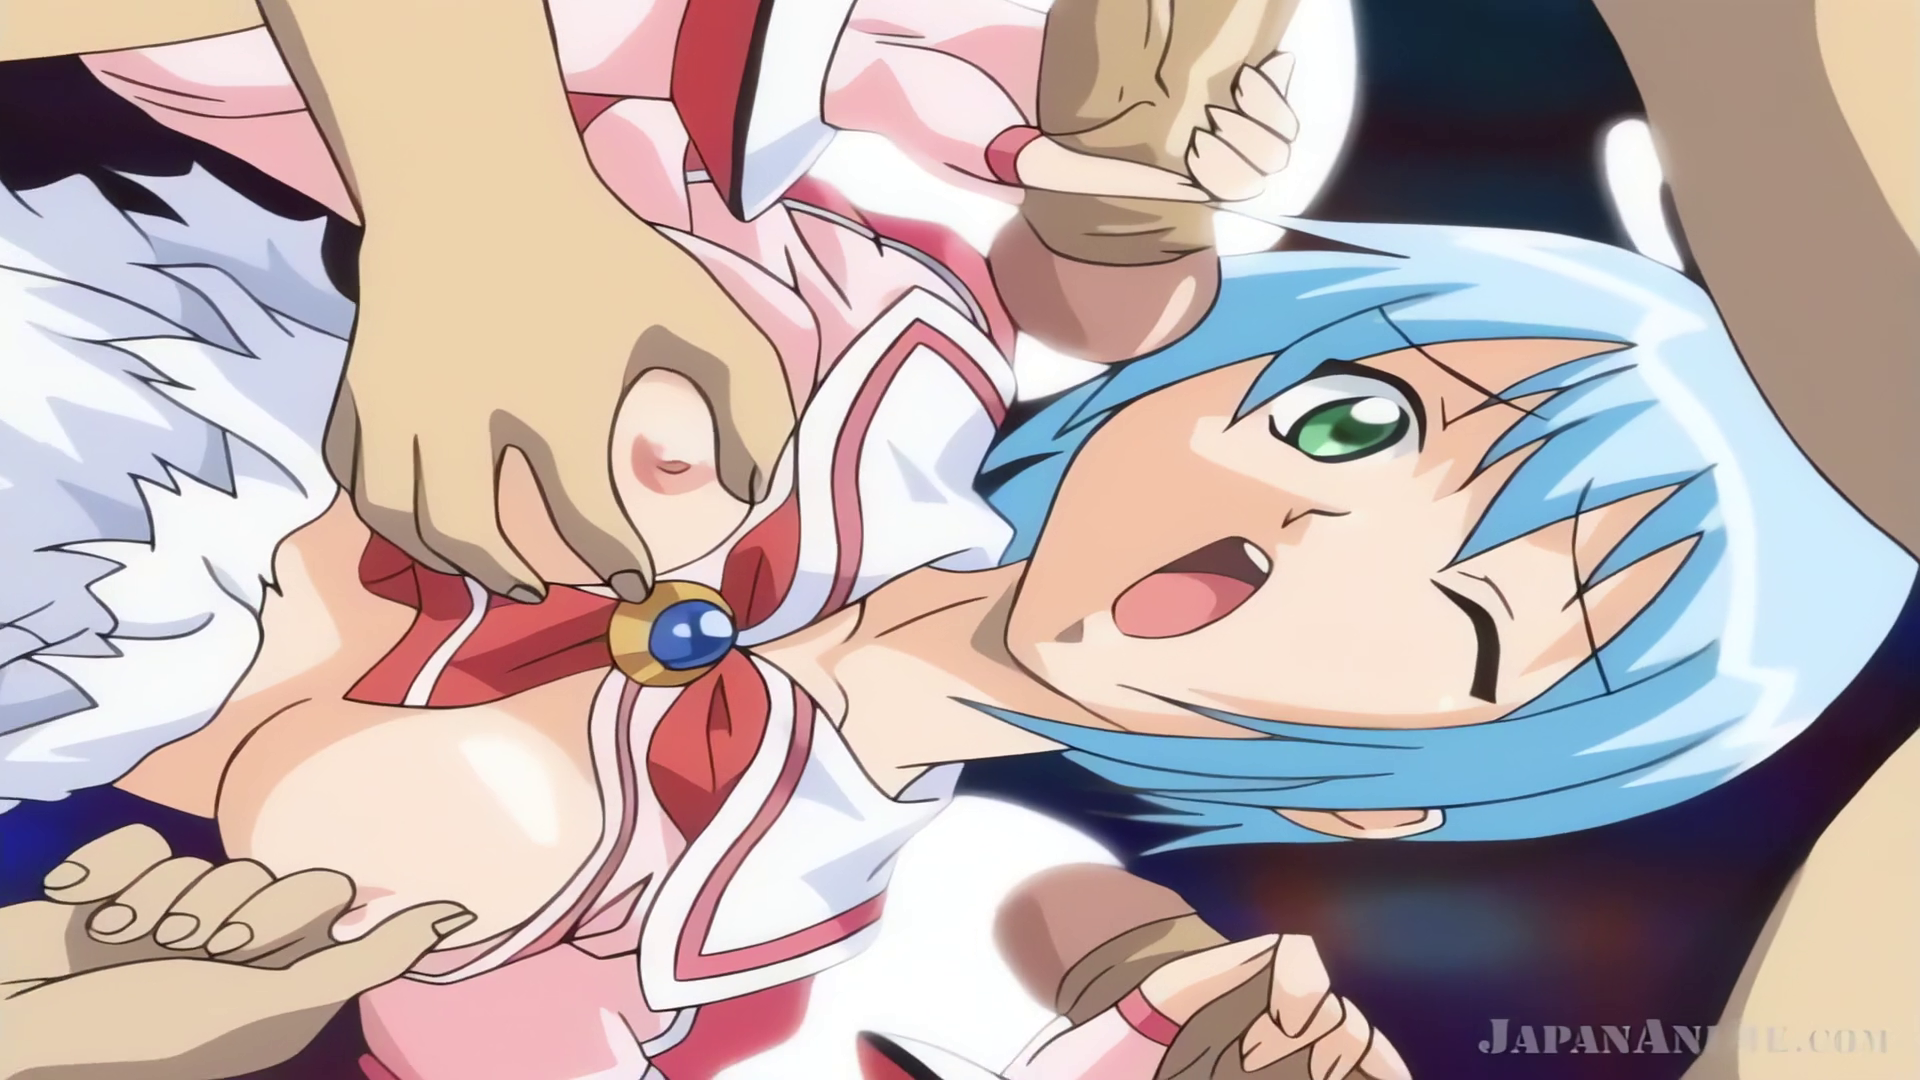 thumbnail for Makai Tenshi Djibril 2 on oppai.stream, all your anime hentai needs in one place